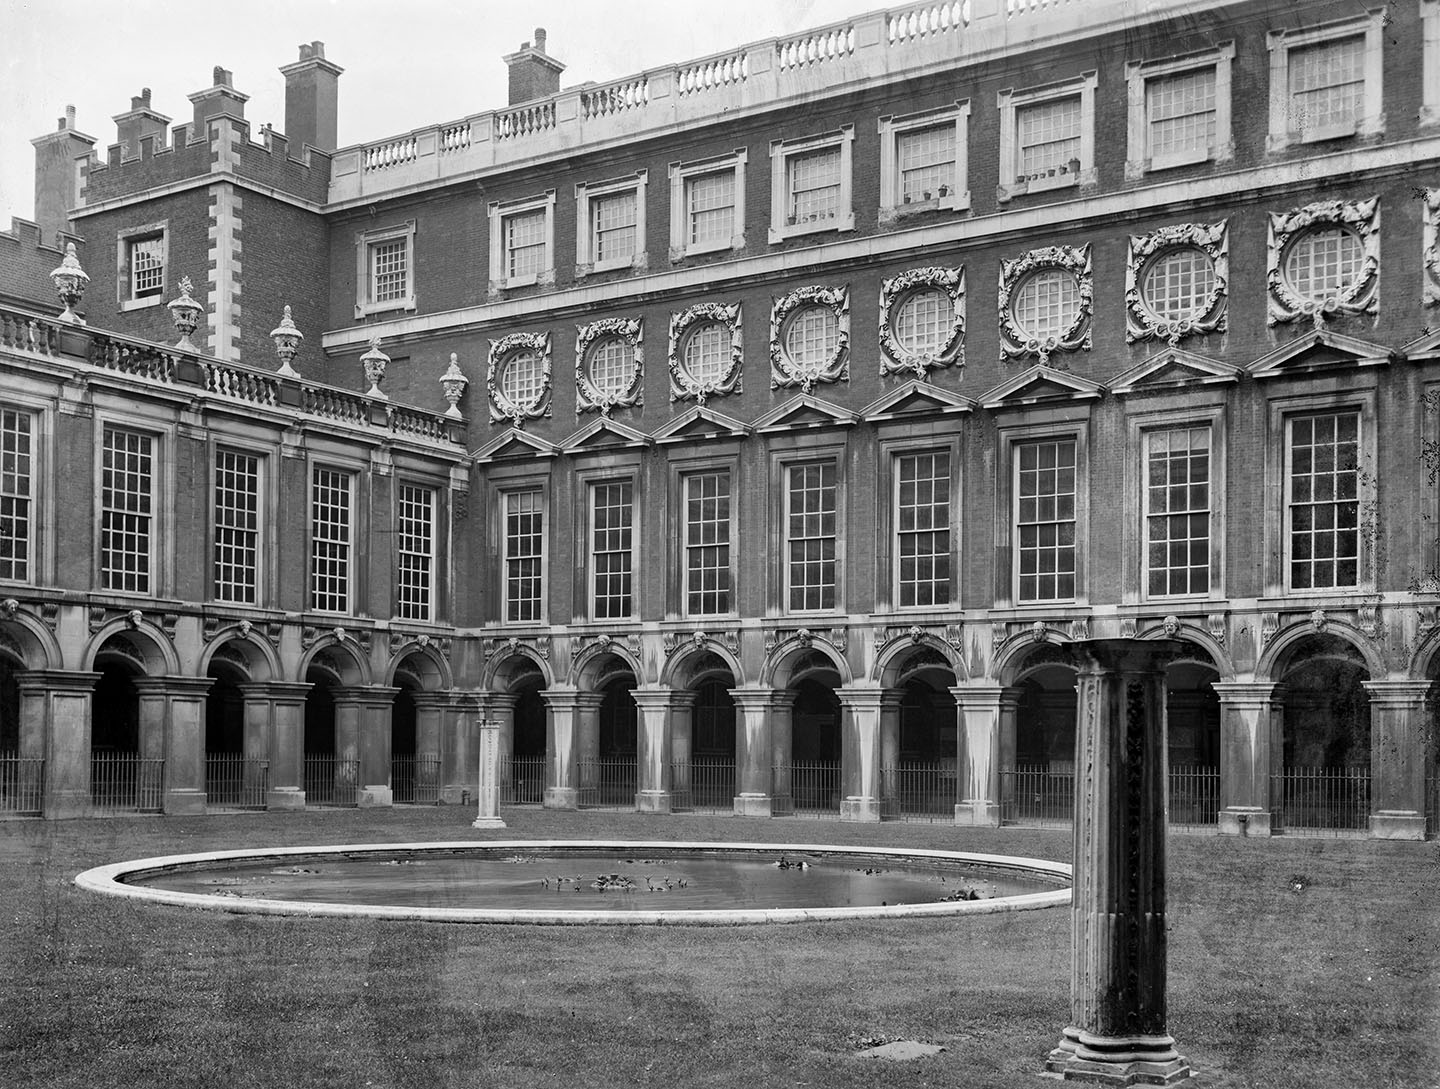 Hampton Court. The King’s Apartments, including the Cartoon Gallery, on the left.